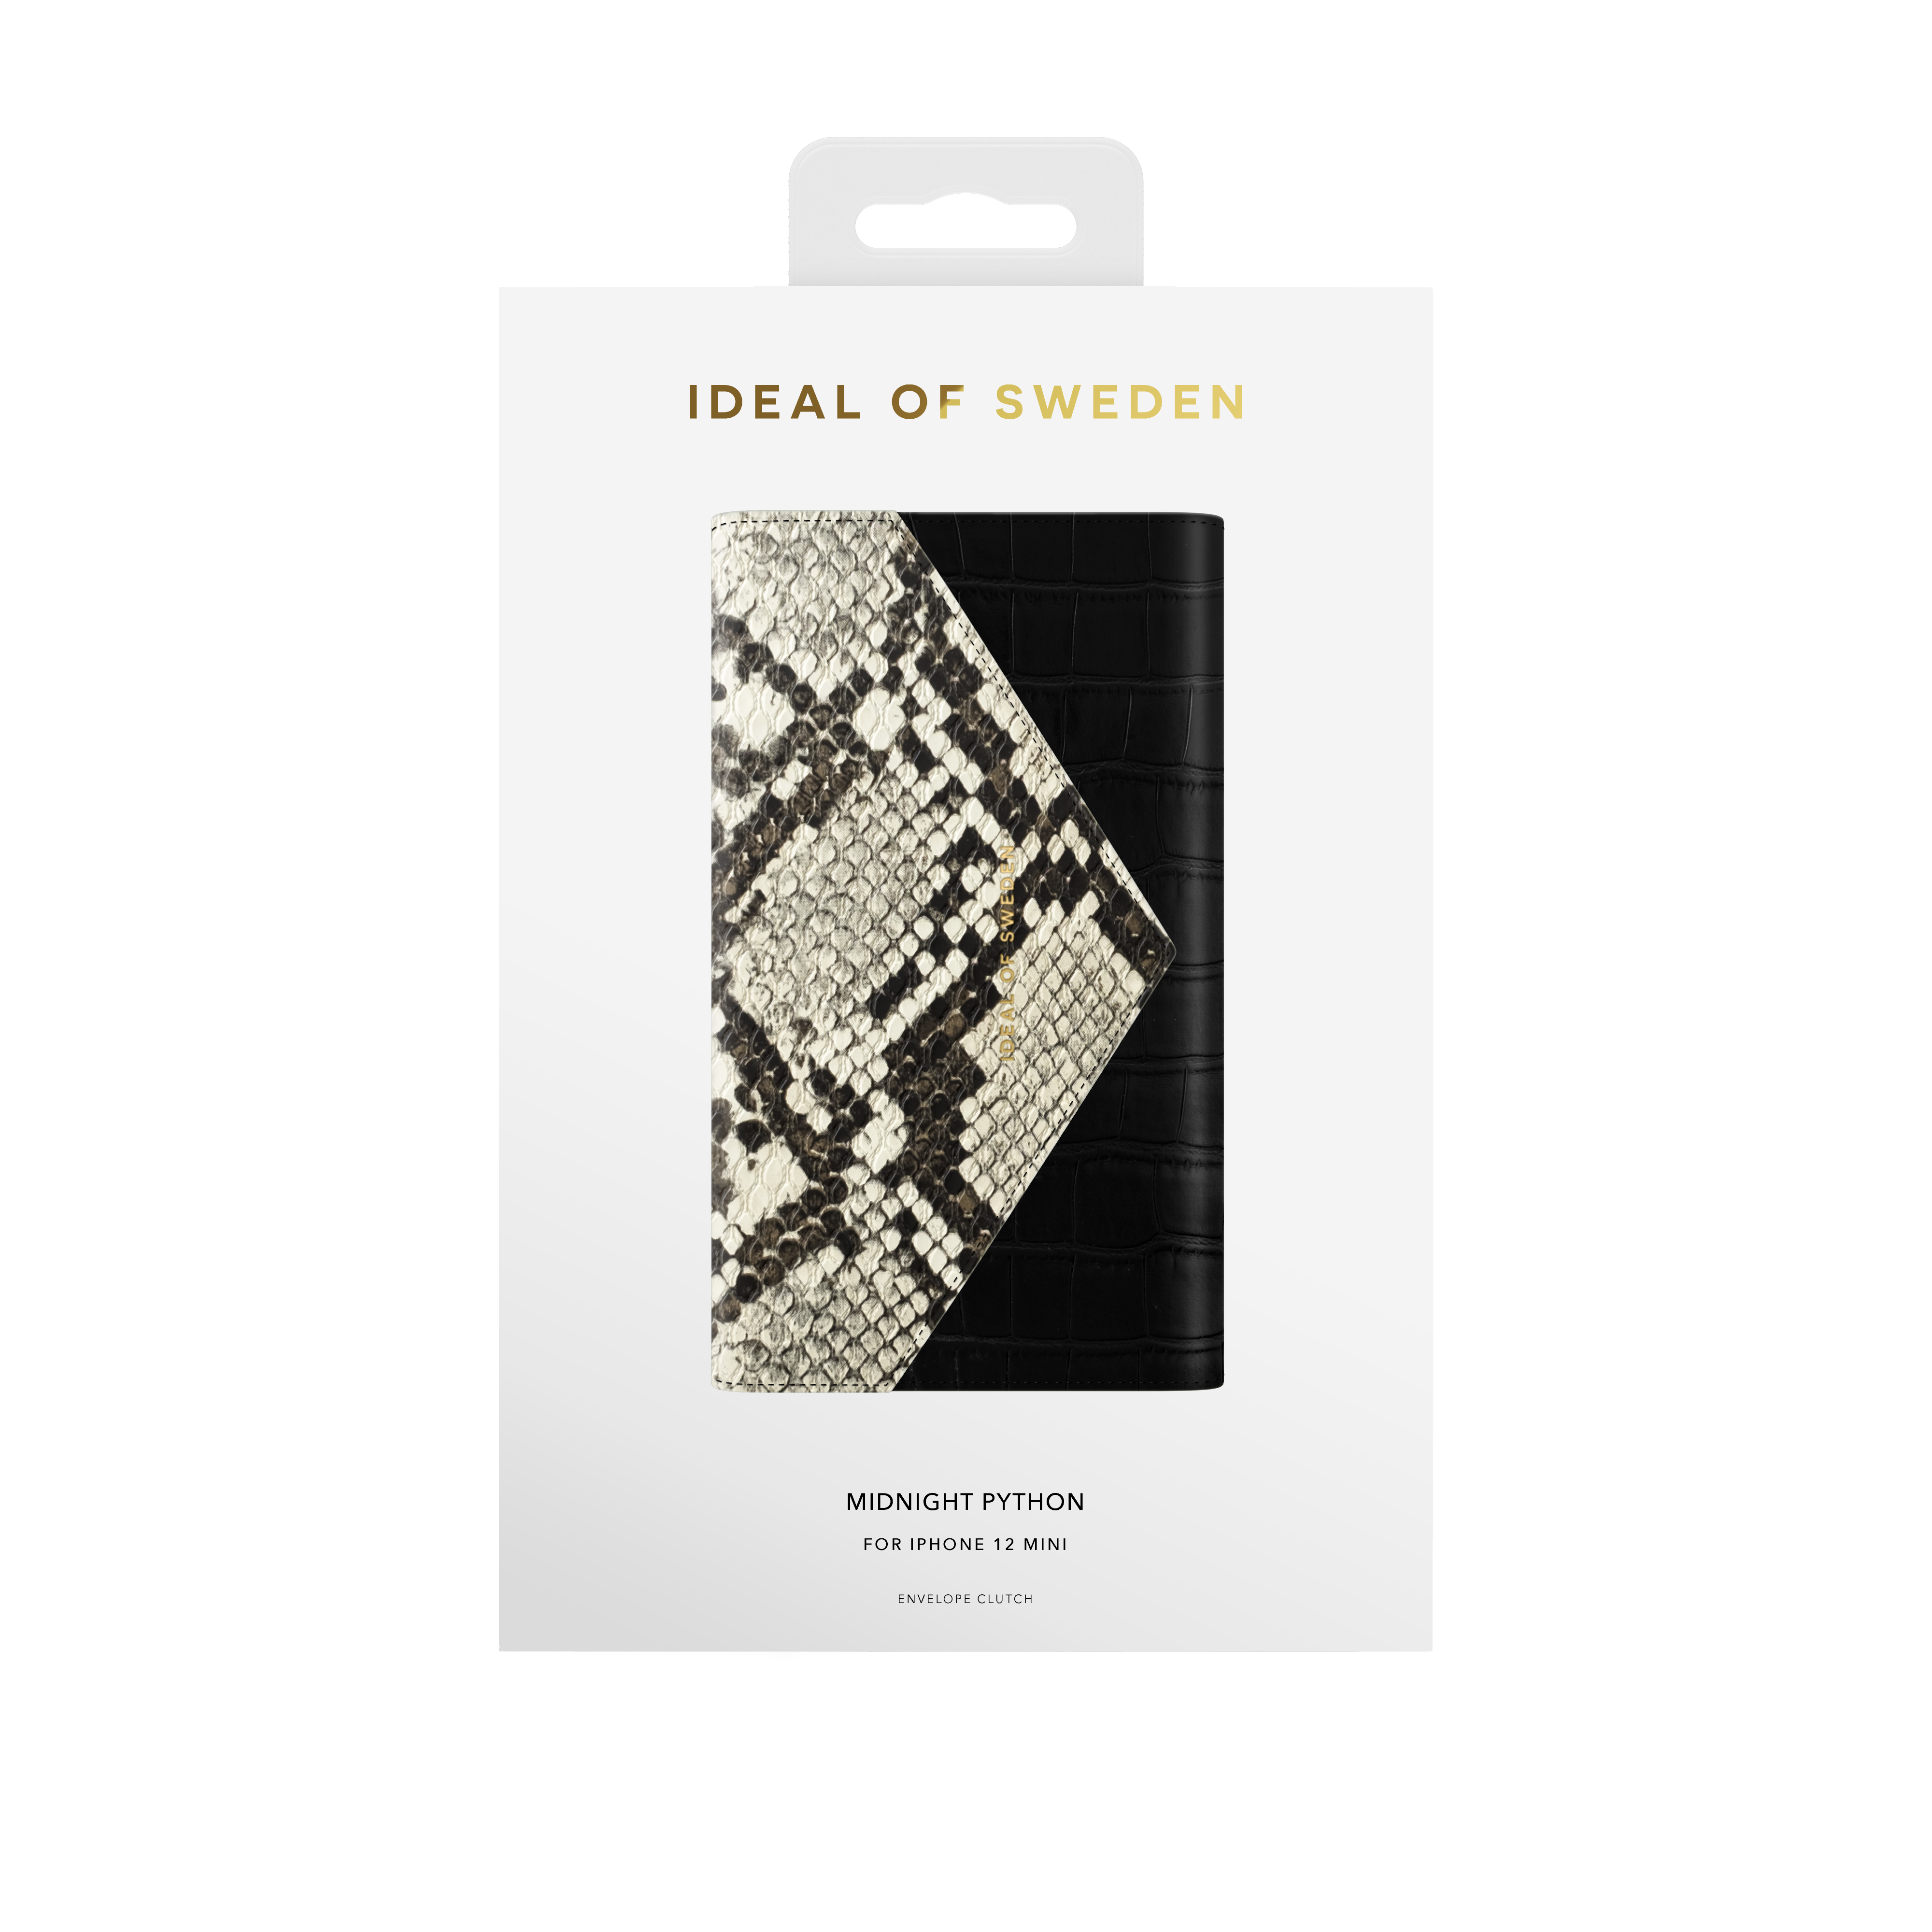 IDEAL OF SWEDEN IDECSS20-I2054-199, Full IPhone Cover, Apple, Midnight Mini, Python 12